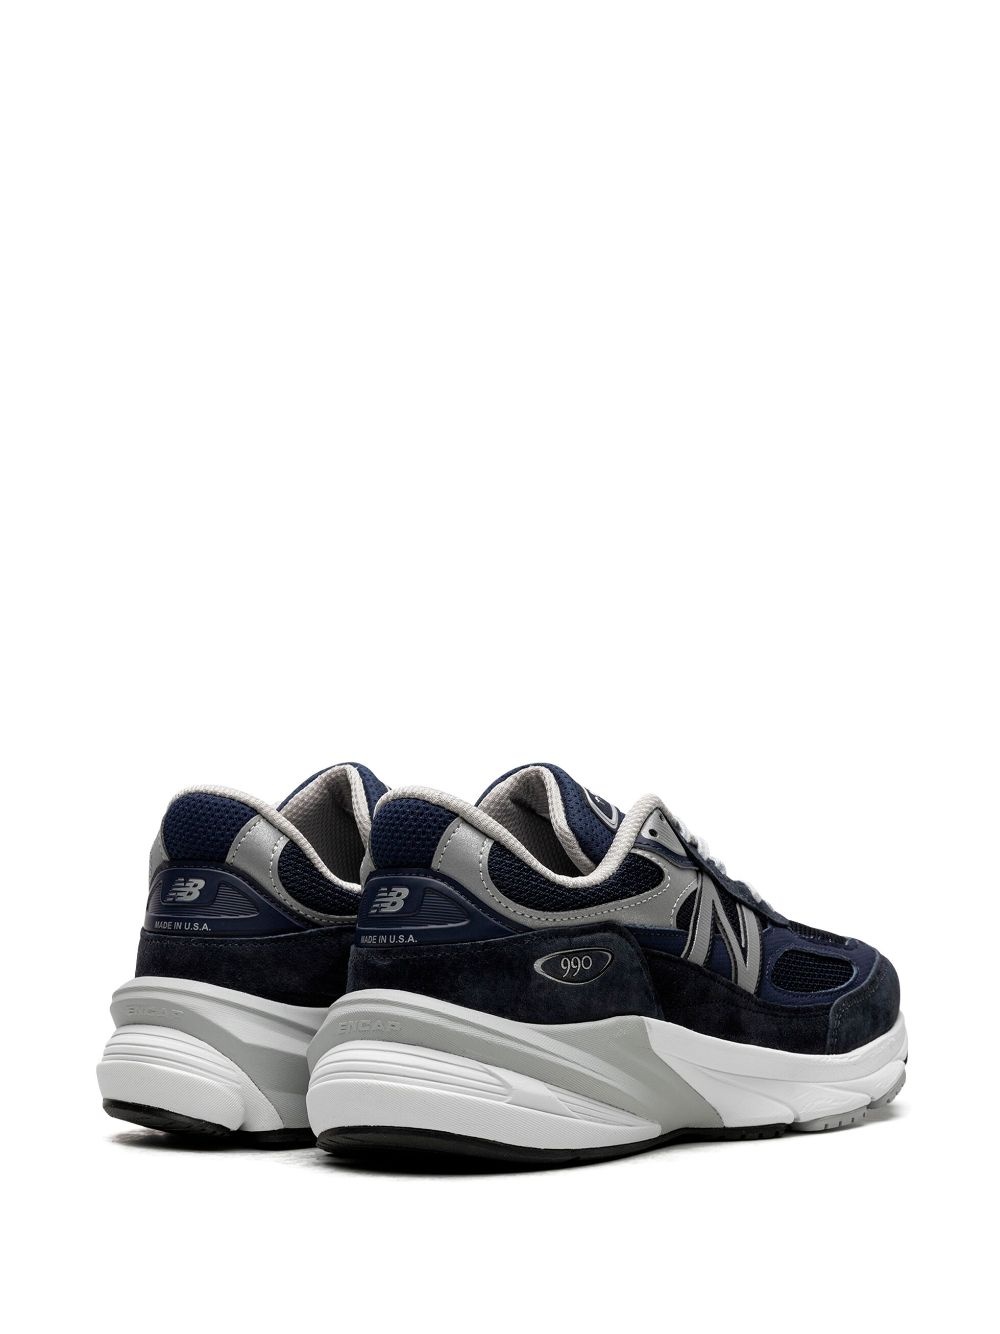 990v6 "Navy" leather sneakers - 3